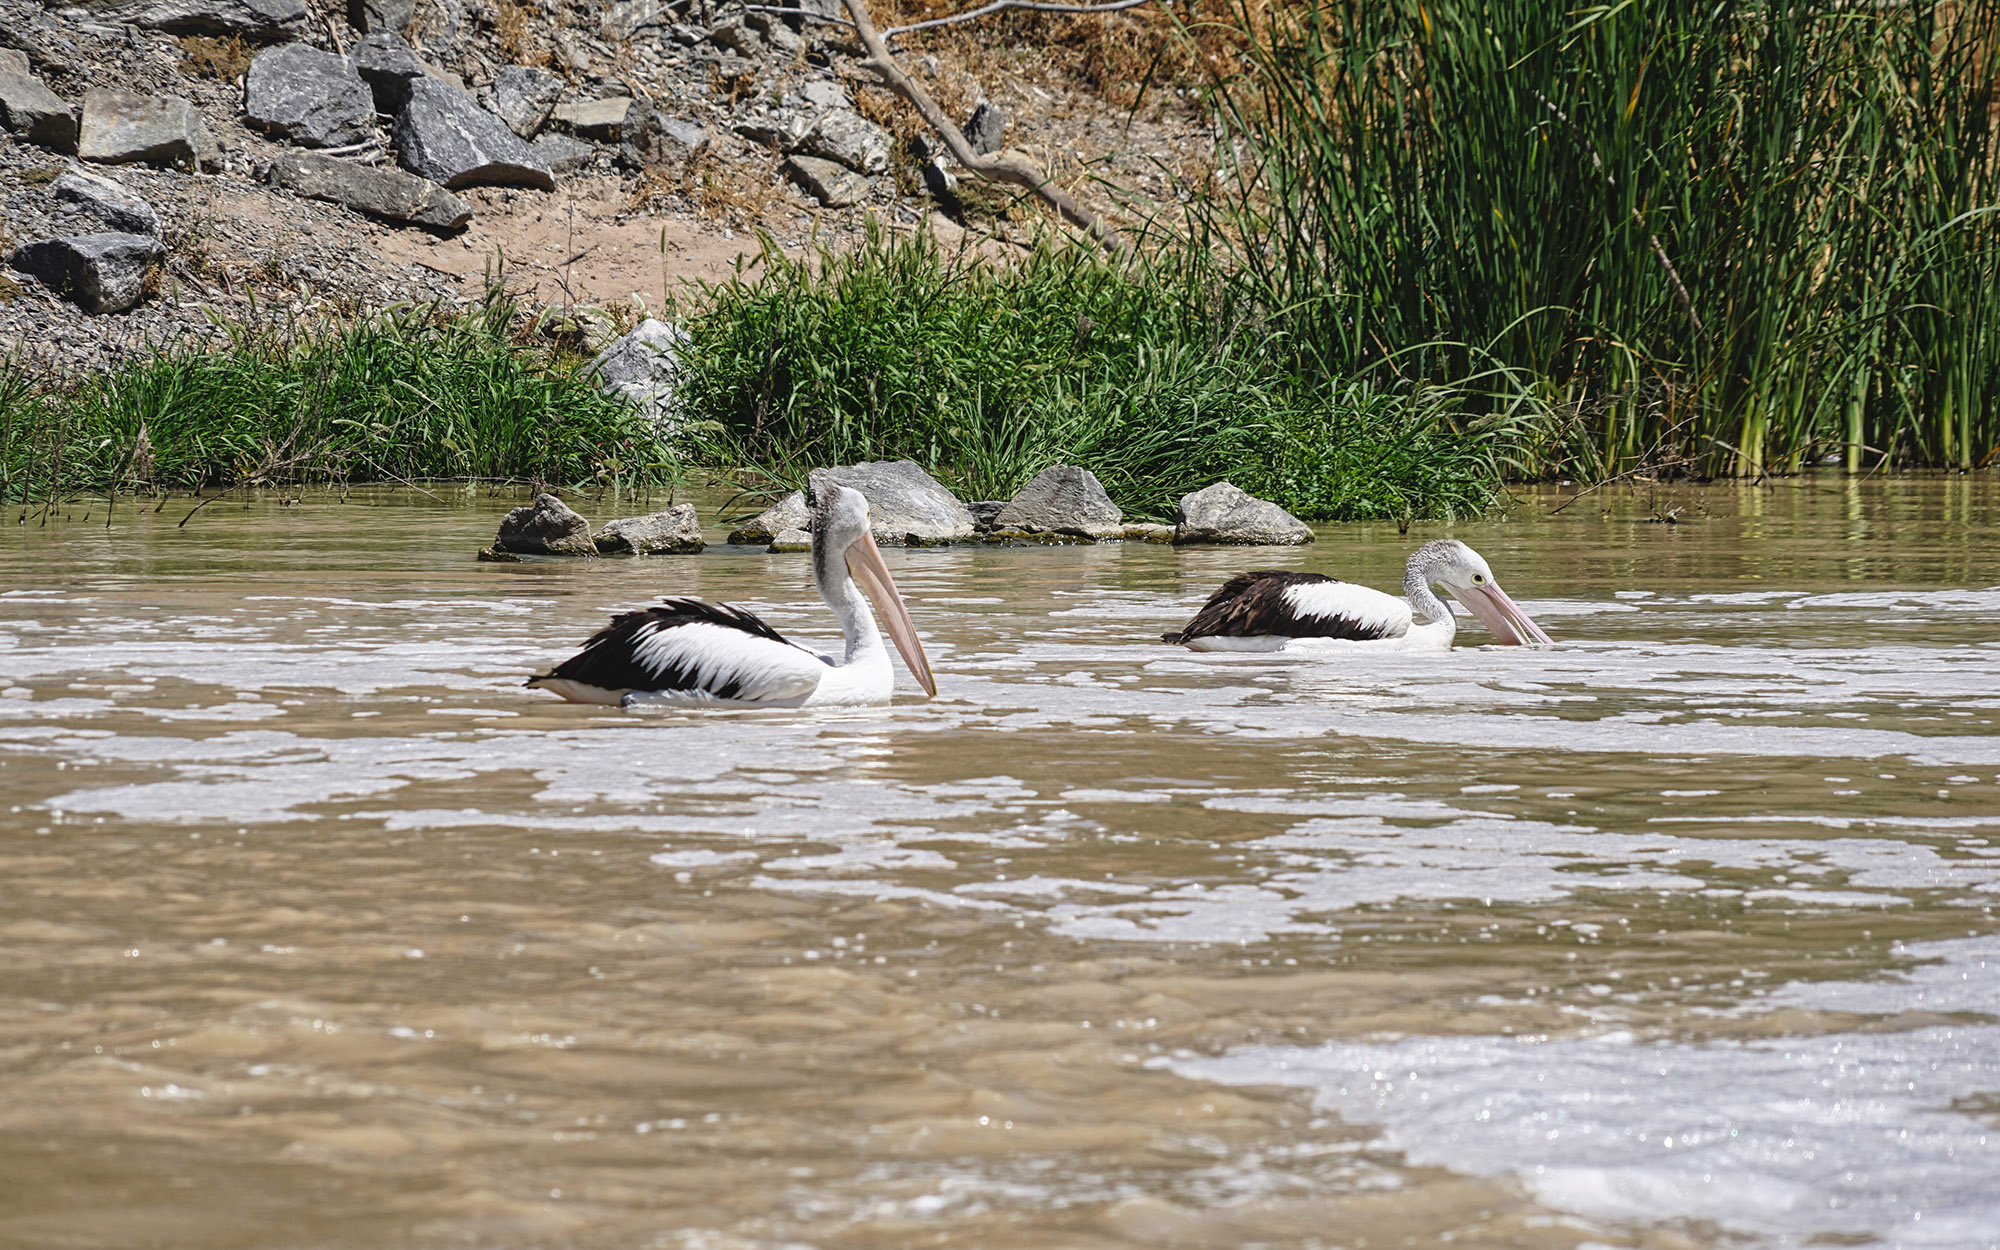 Pelicans on the Darling River at Menindee, New South Wales